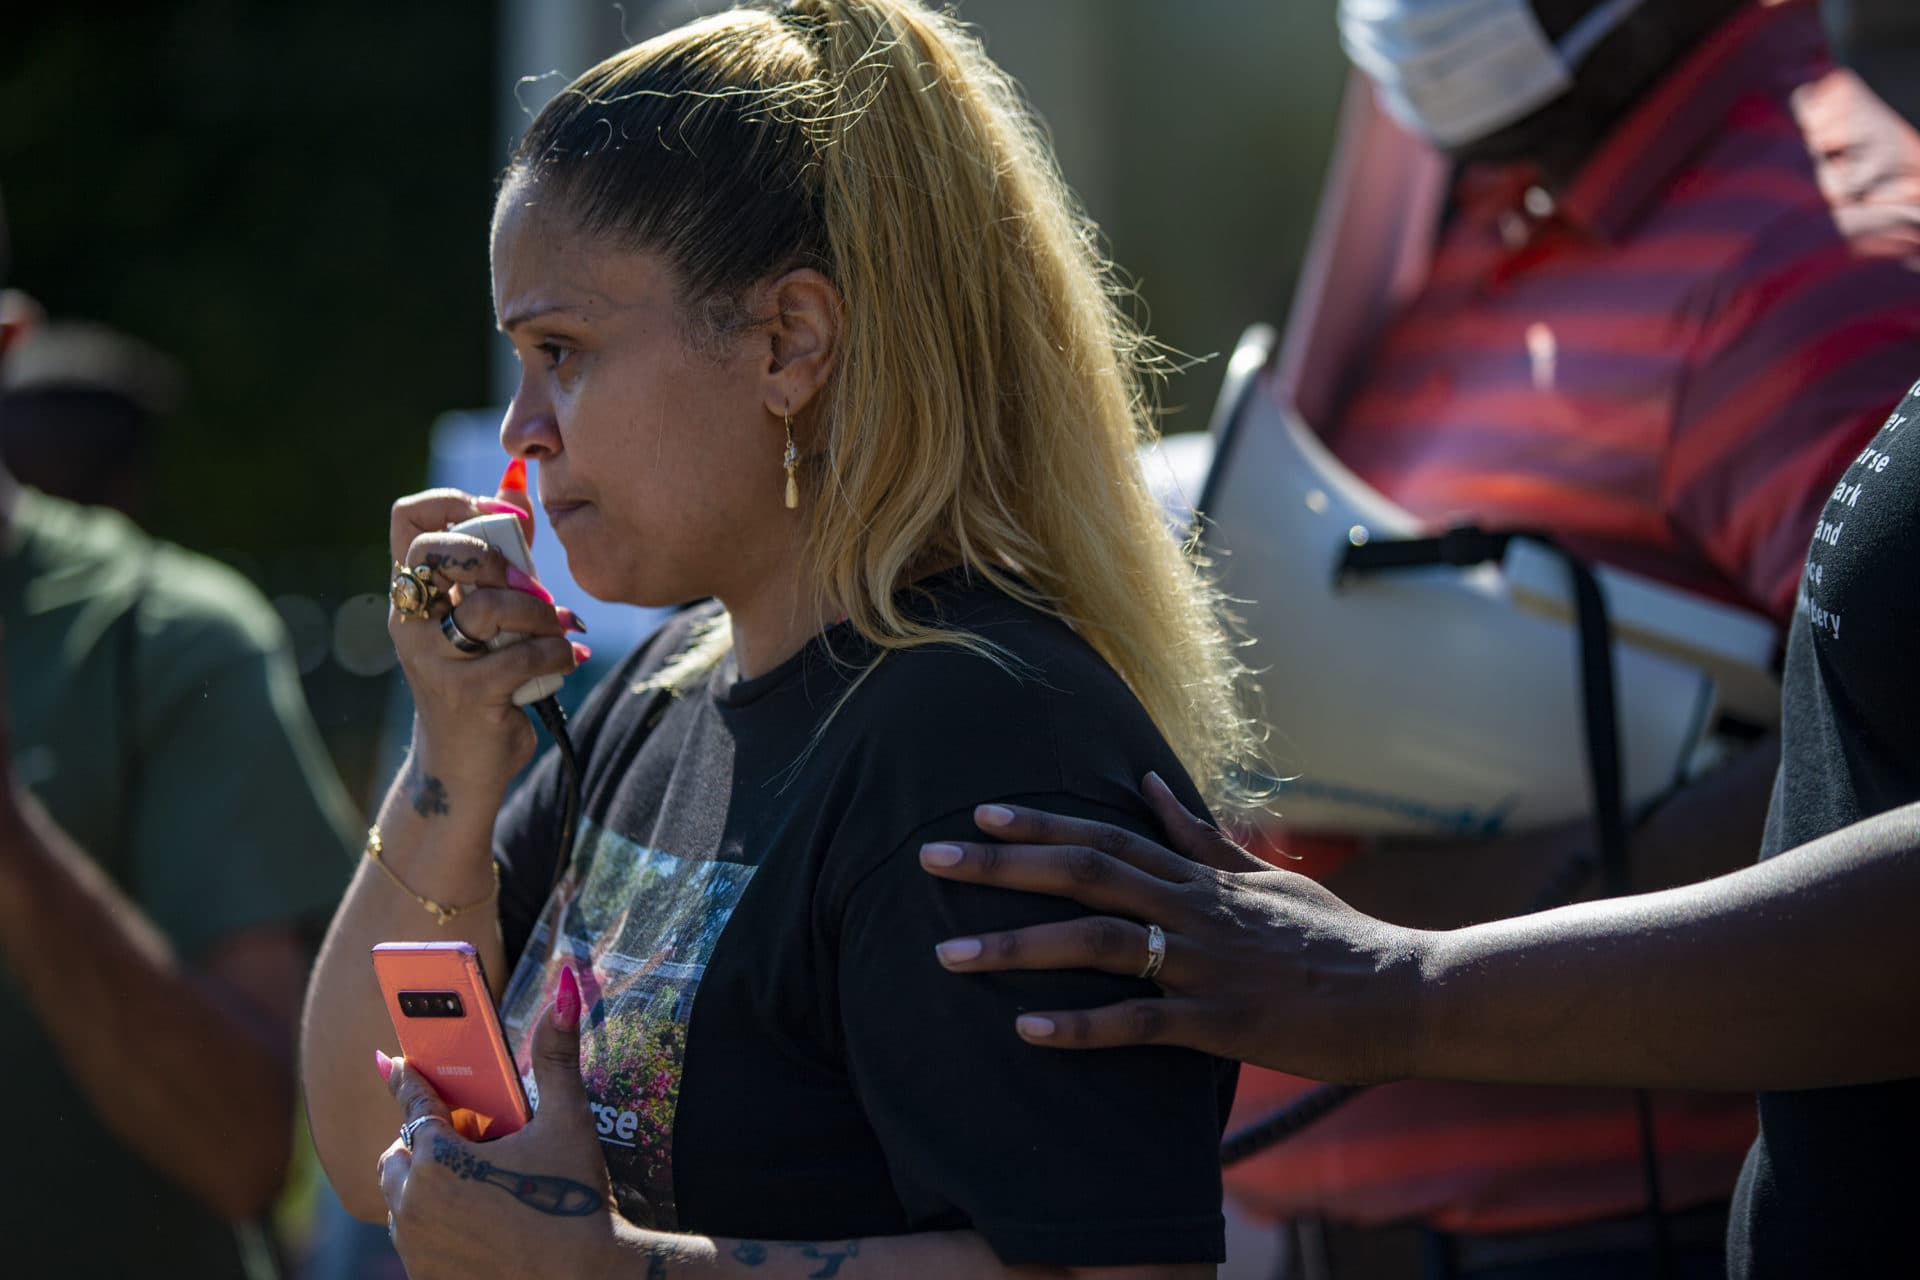 Monica Cannon-Grant touches the shoulder of Angelique Negroni-Kearse, as she pauses during a speech in front of the State House. Negroni-Kearse is the widow of Andrew Kearse who died in police custody after being denied medical care in 2017 in Schenectady, New York. (Jesse Costa/WBUR)